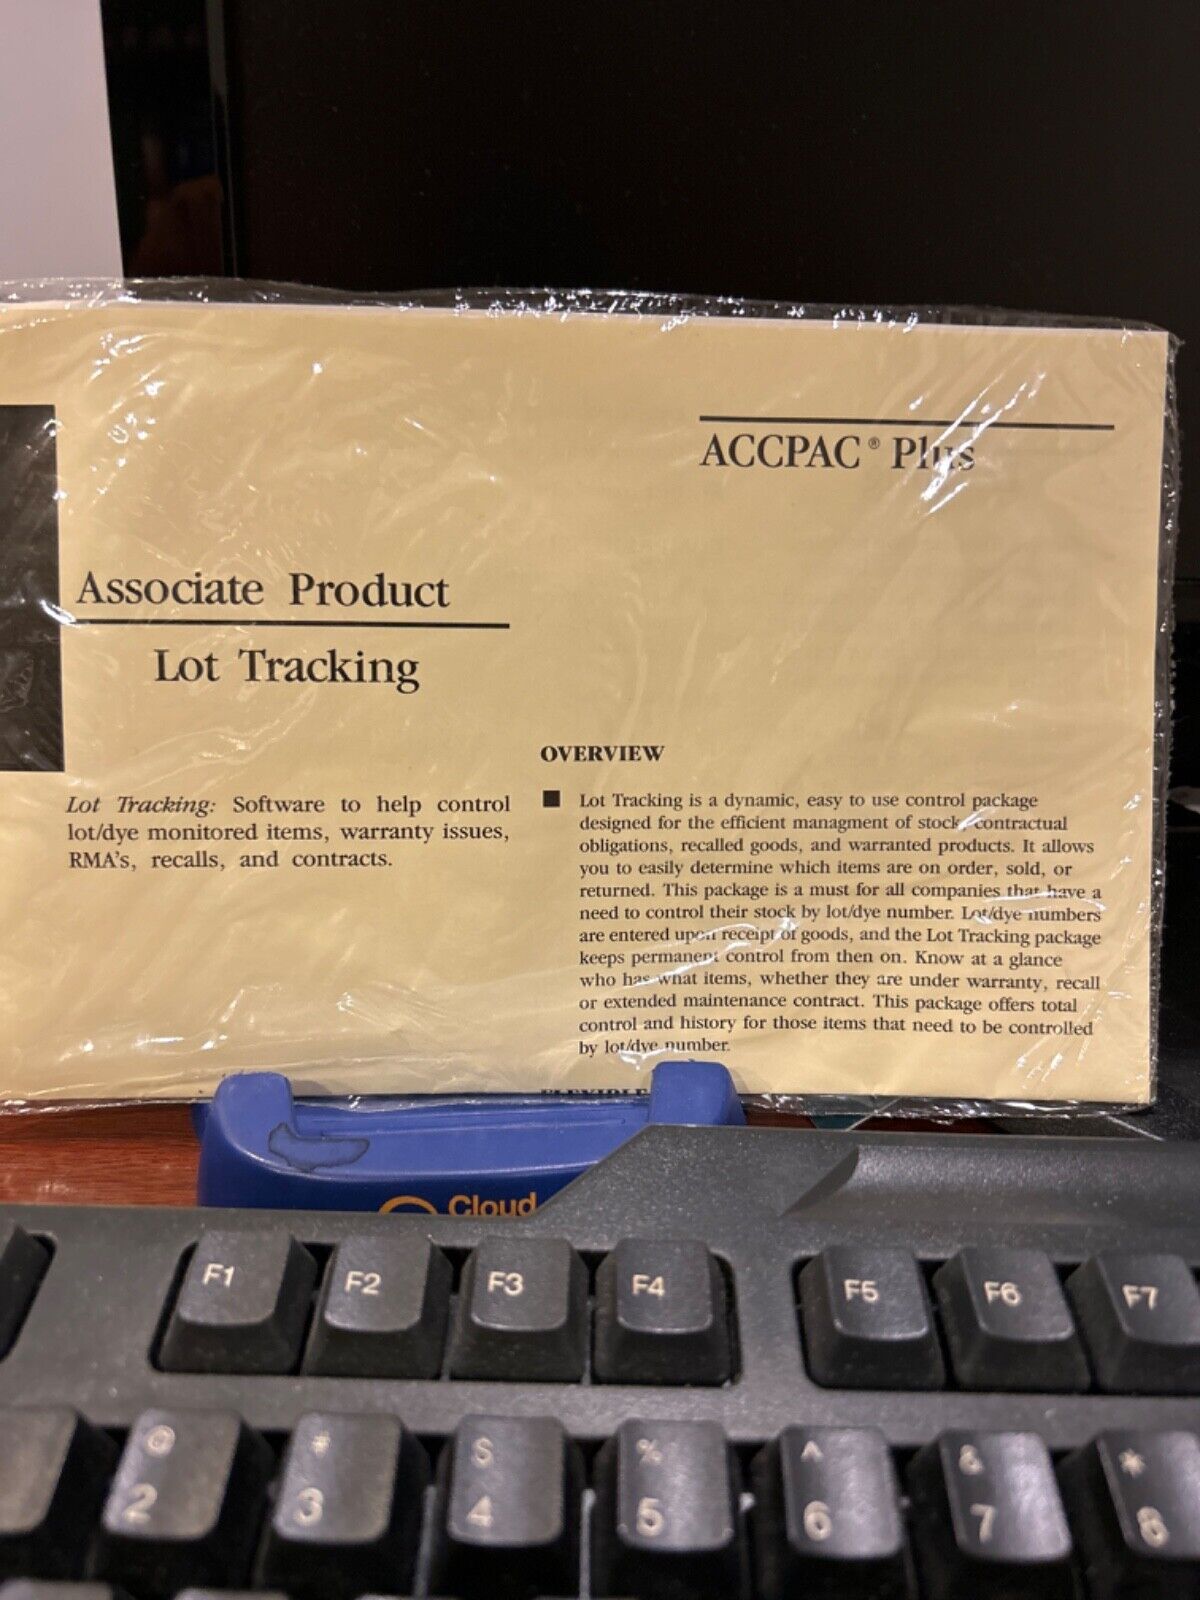 BRAND NEW SEALED ACCPAC Plus Accounting Lot Tracking Companion Product.